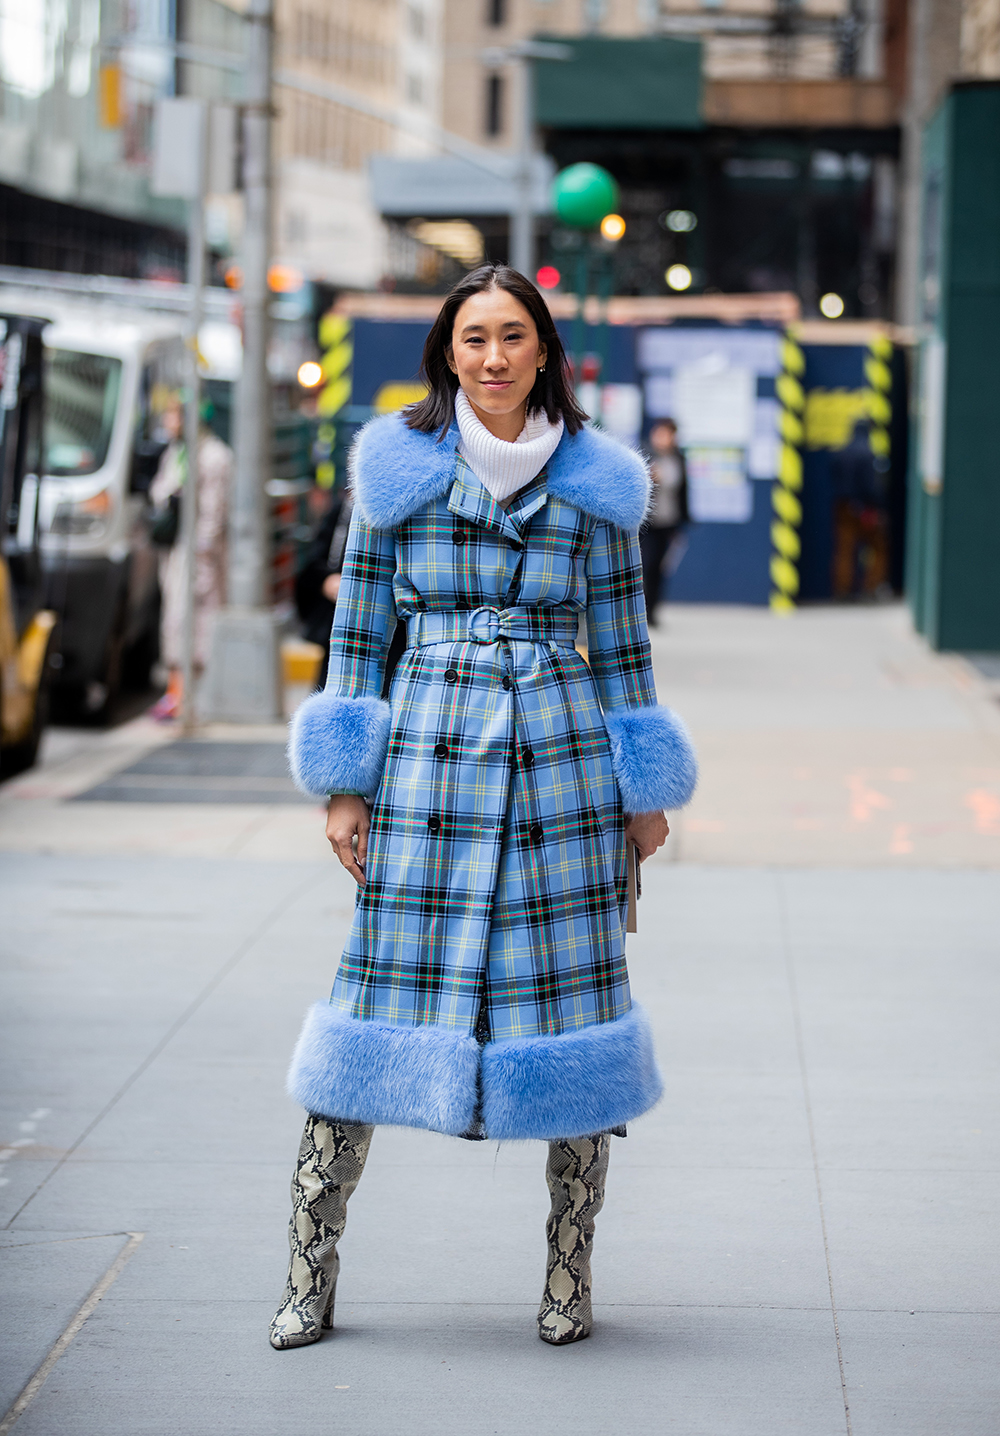 NEW YORK, NEW YORK - FEBRUARY 12: Eva Chen is seen weairng blue belted checkered coat with faux fur collar and sleeves outside Michael Kors during New York Fashion Week Fall / Winter 2020 on February 12, 2020 in New York City. (Photo by Christian Vierig/Getty Images)